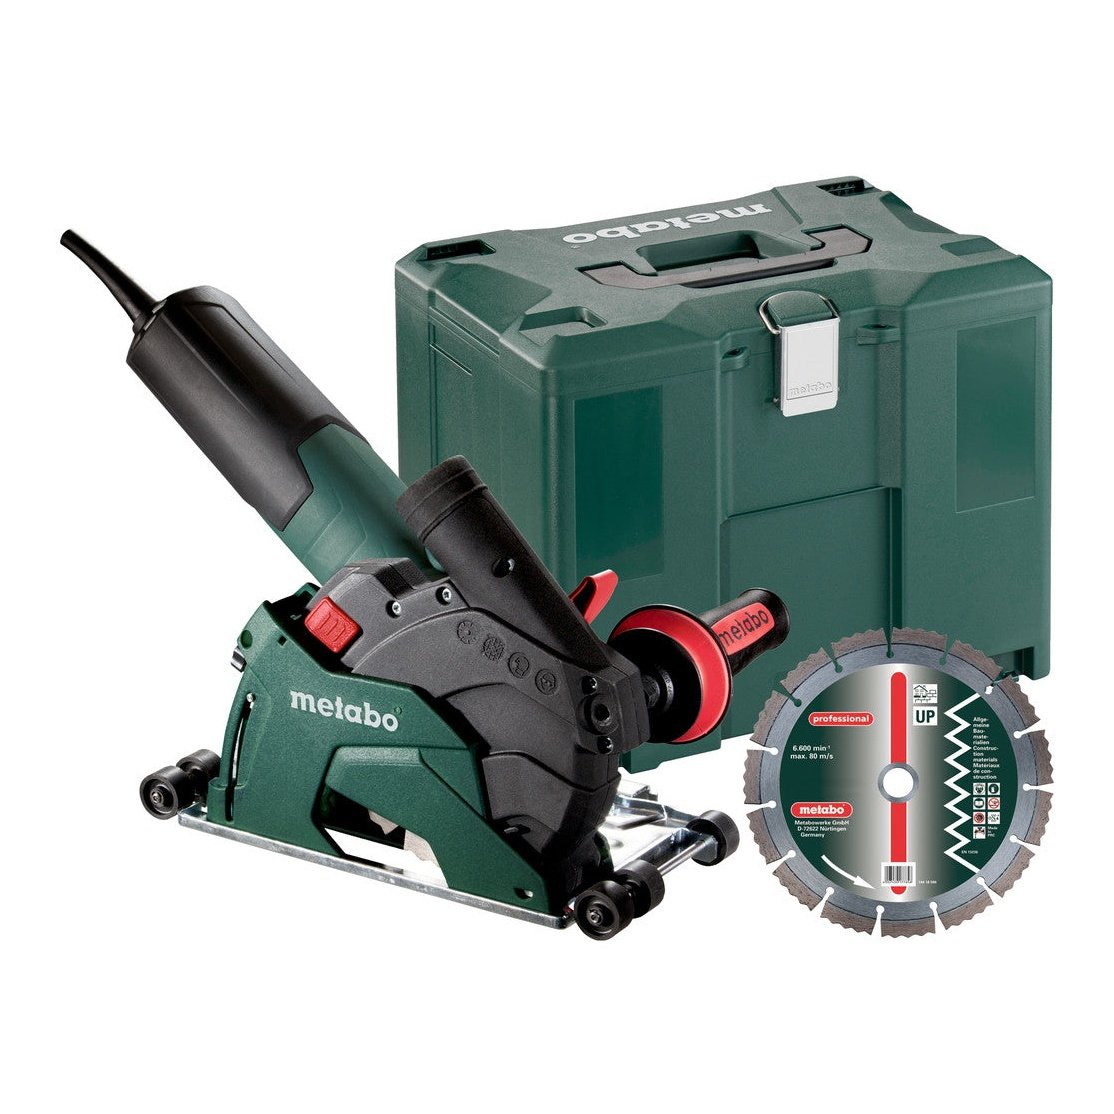 METABO 1350 W 125 MM DIAMOND CUTTING SYSTEM INCLUDING EXTRACTION SHROUD (T13-125CED)